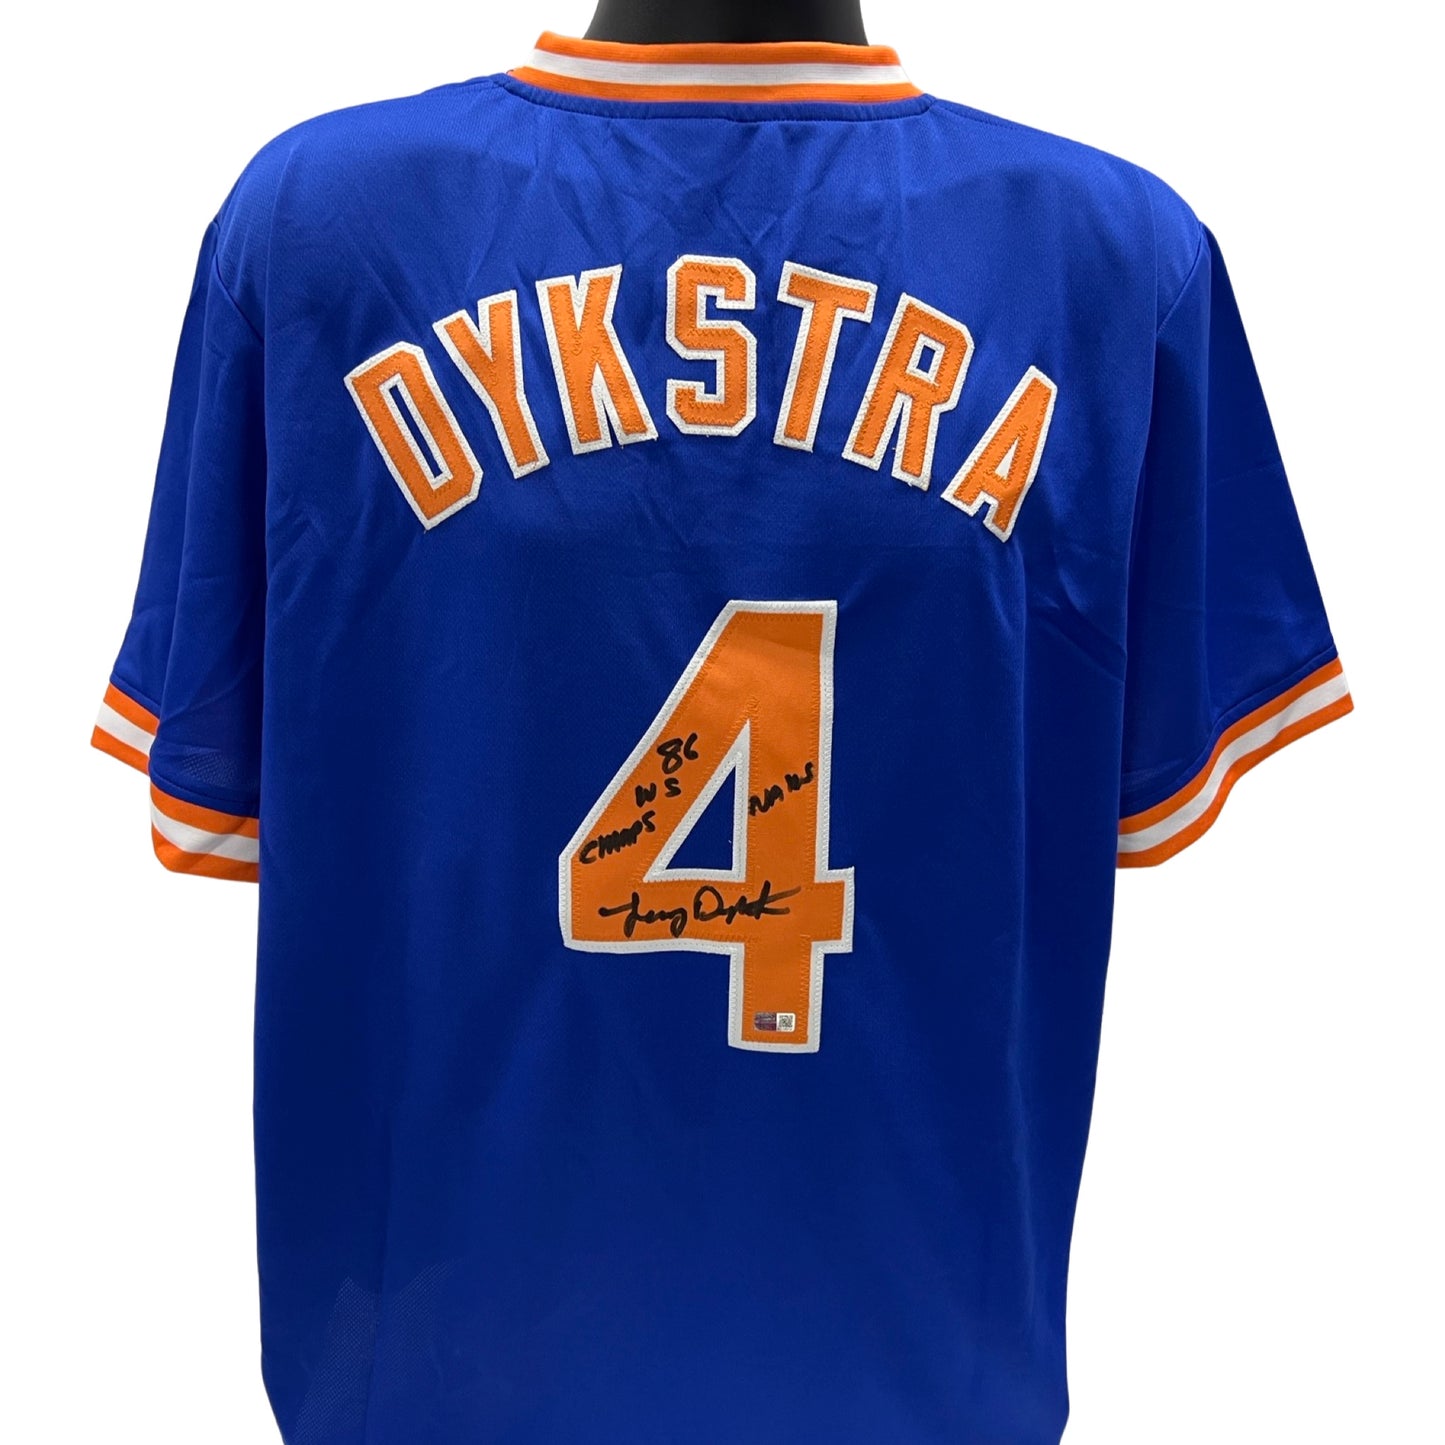 Lenny Dykstra Autographed New York Mets Blue Jersey “Nails, 86 WS Champs” Inscriptions Steiner CX